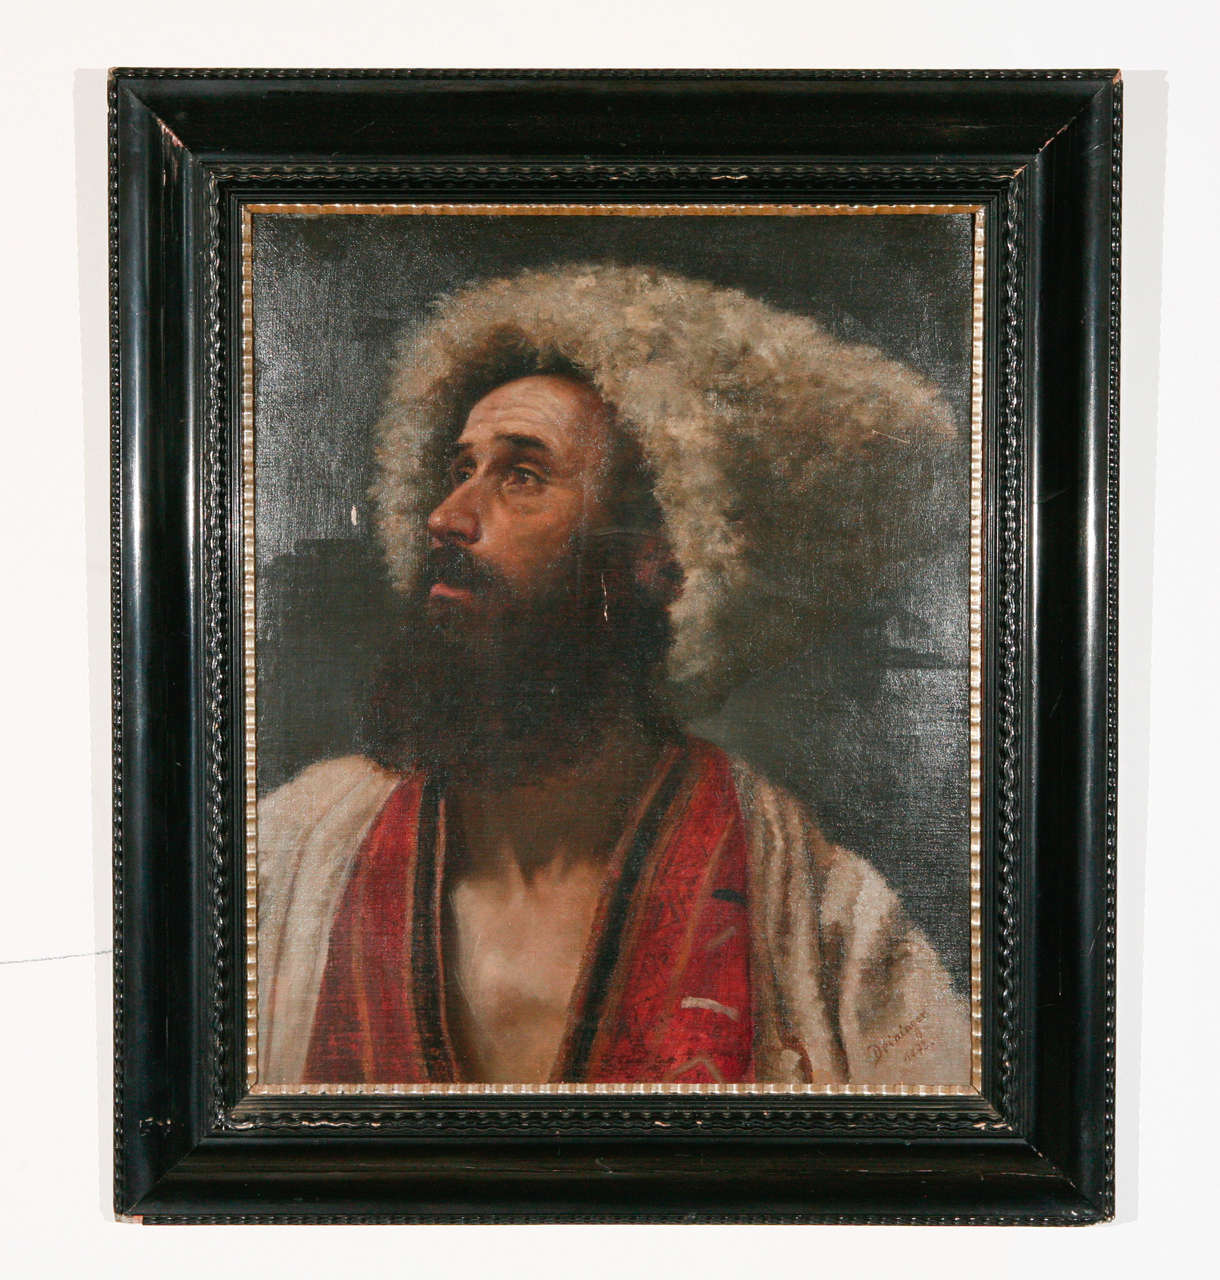 19th Century oil painting of a Russian Cossack.
Visit the Paul Marra storefront to see more furnishings and lighting including 21st Century.